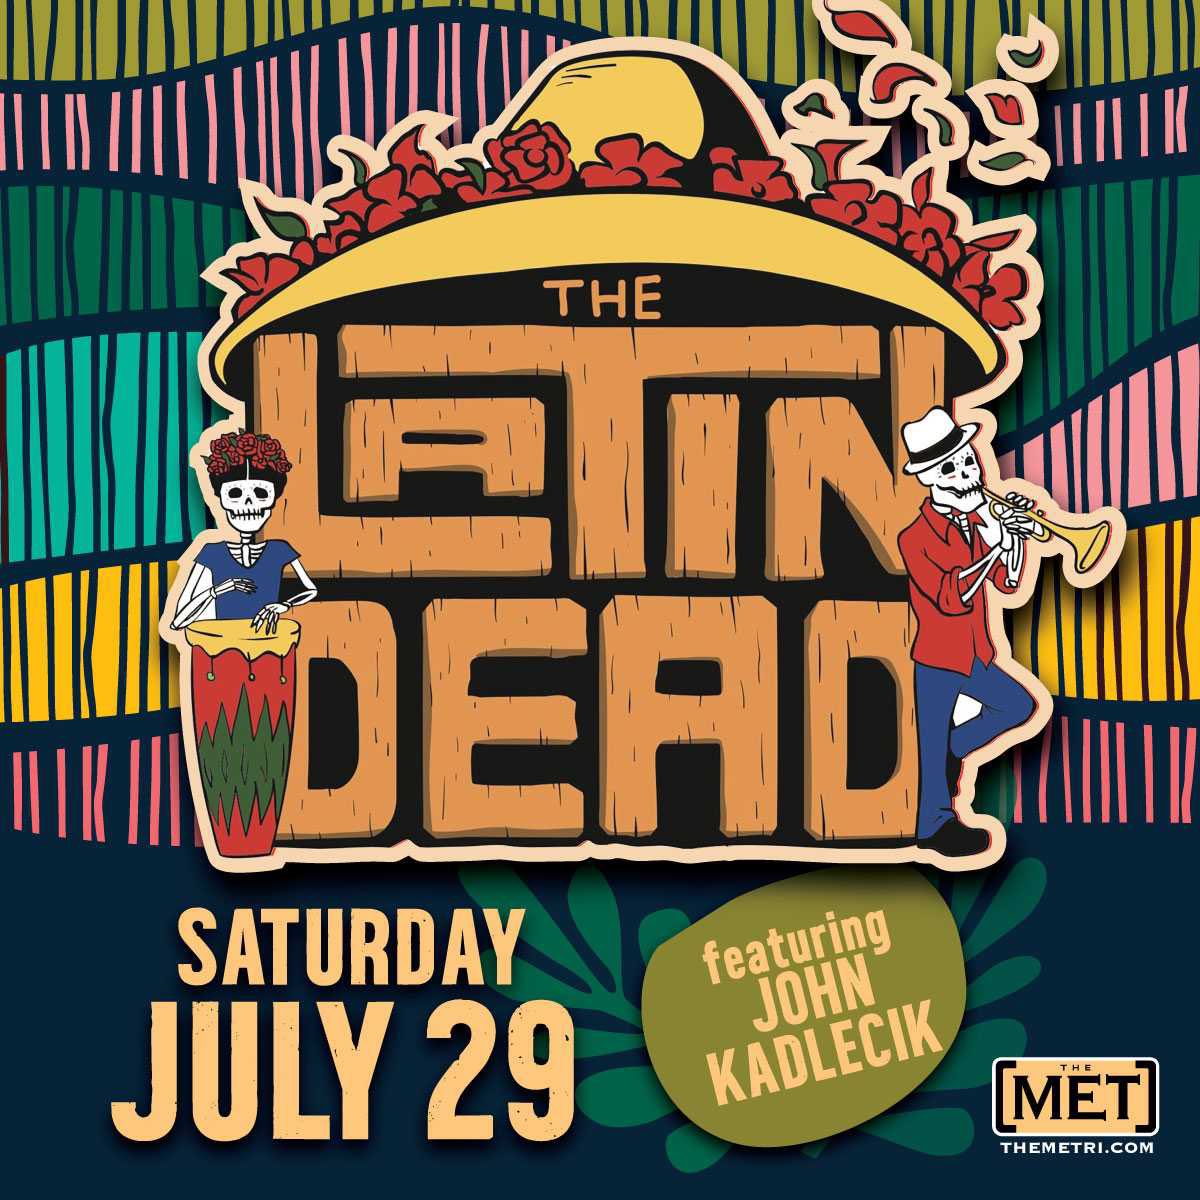 Attention Newport Folk Festival goers! 
Keep the party going tomorrow night with The Latin Dead featuring @johnkadlecik over at @The_Met_RI. Doors 8pm, show 9pm. See you there Rhode Island! bit.ly/3BdDBYf 

#LatinDead #NewportFolkFestival #NewportFolkFest